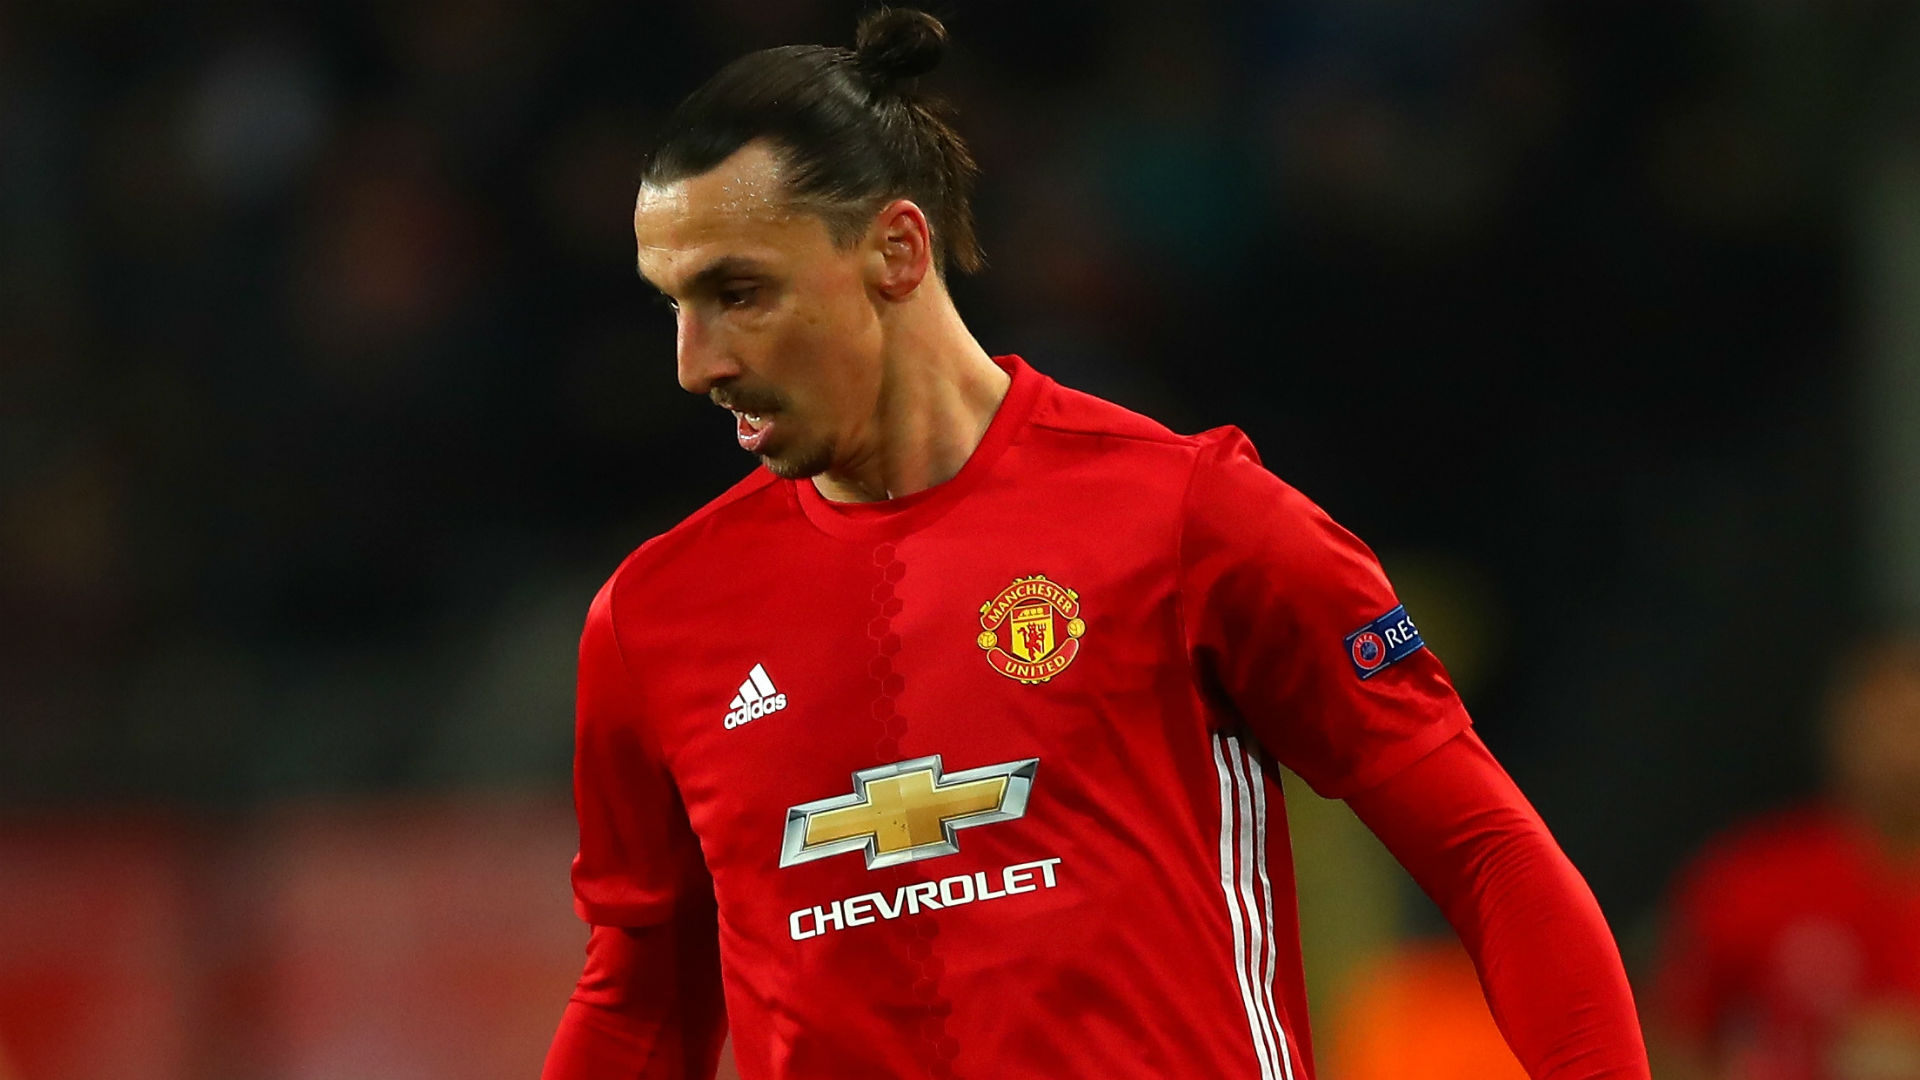 Manchester United star Zlatan Ibrahimovic out for season with serious knee injury ...